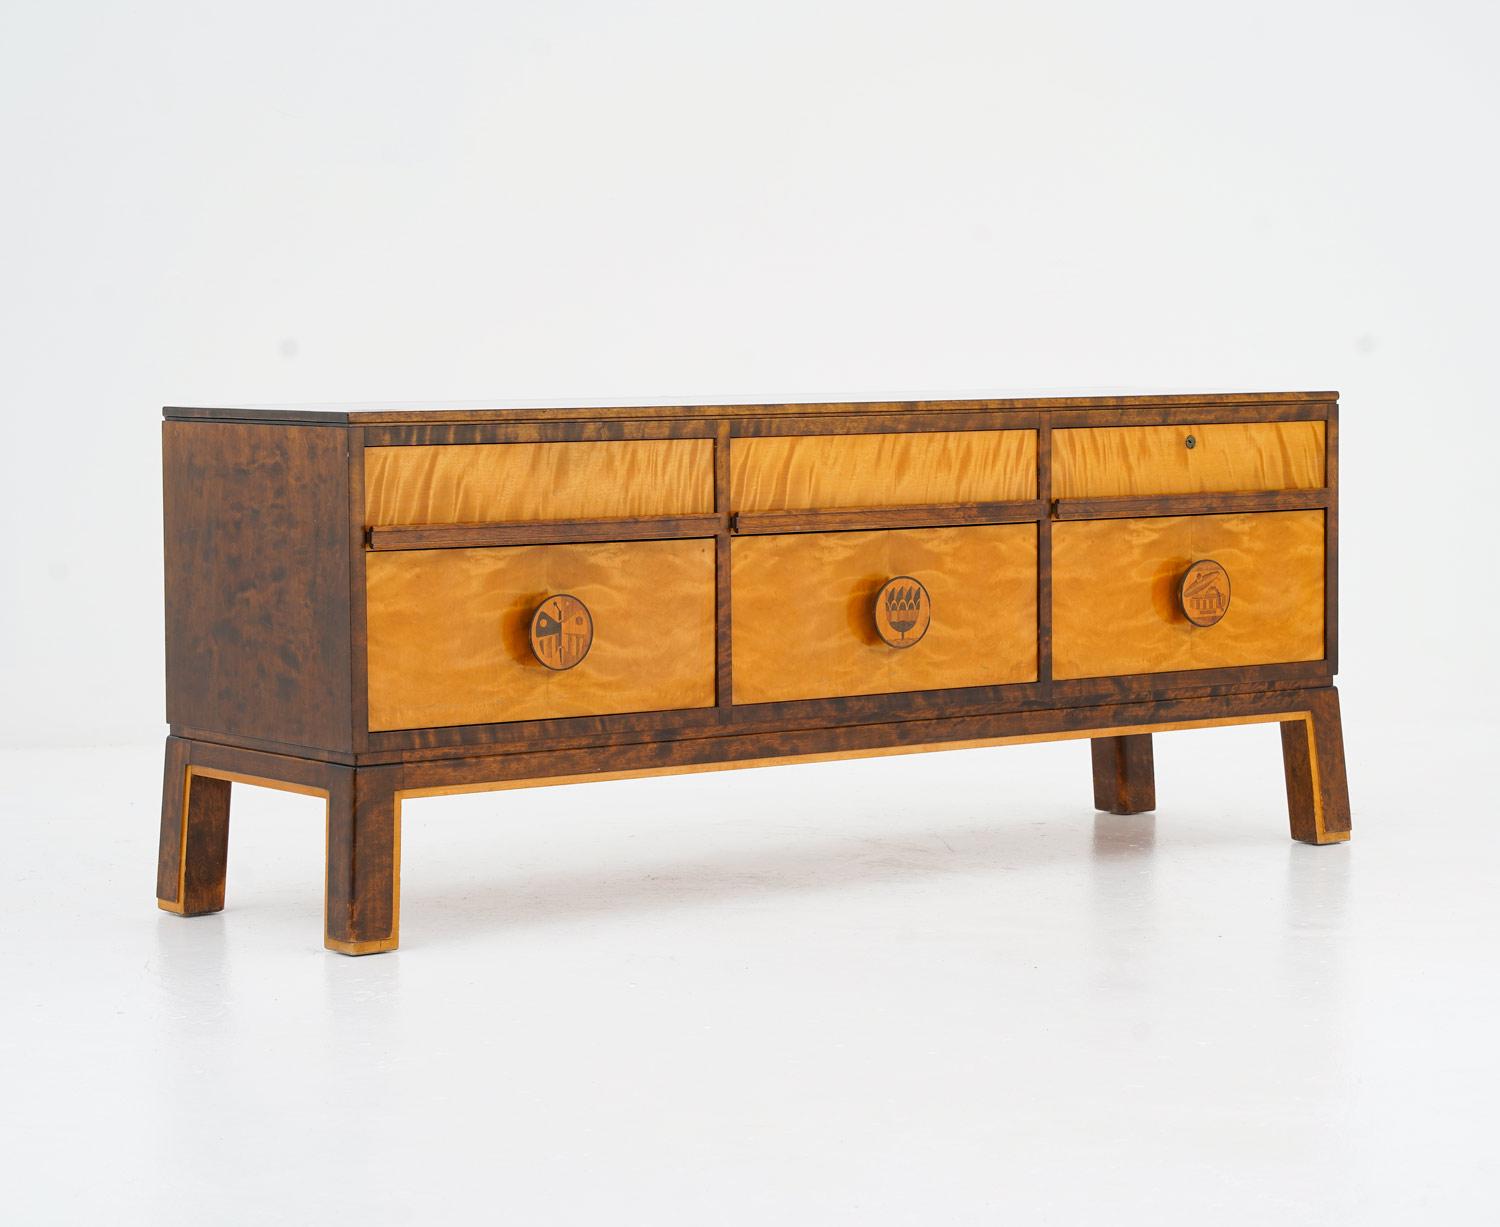 Scandinavian Modern Art Deco Sideboard by Otto Schulz for Boet, 1930s For Sale